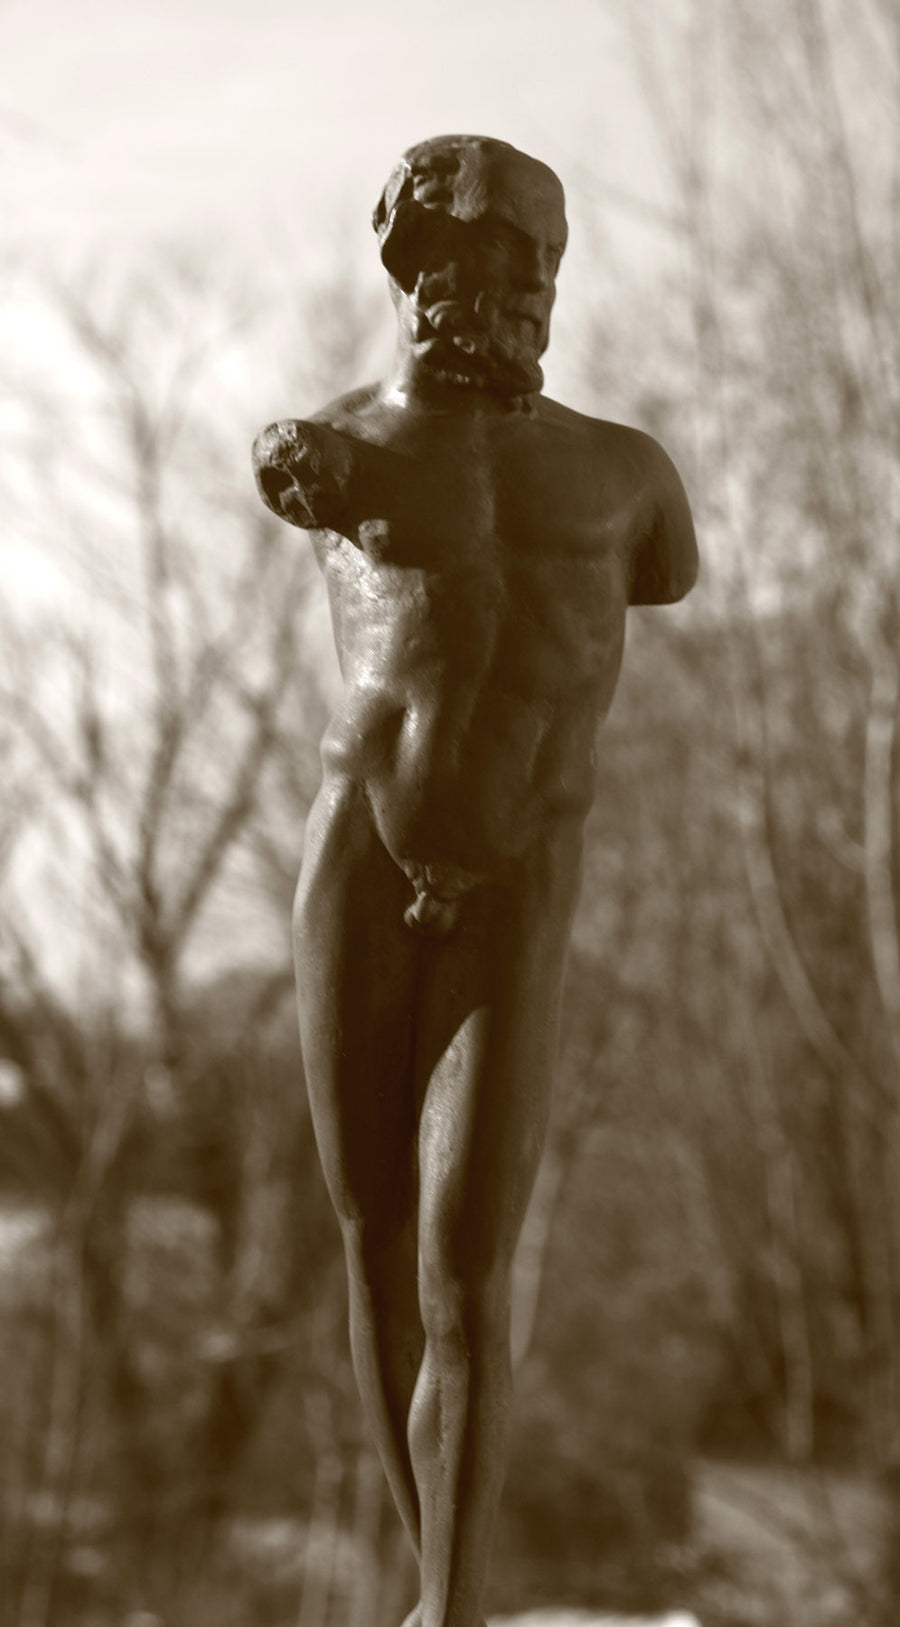 photo detail of bronze-colored plaster cast sculpture of standing nude satyr figure on square base in front of trees